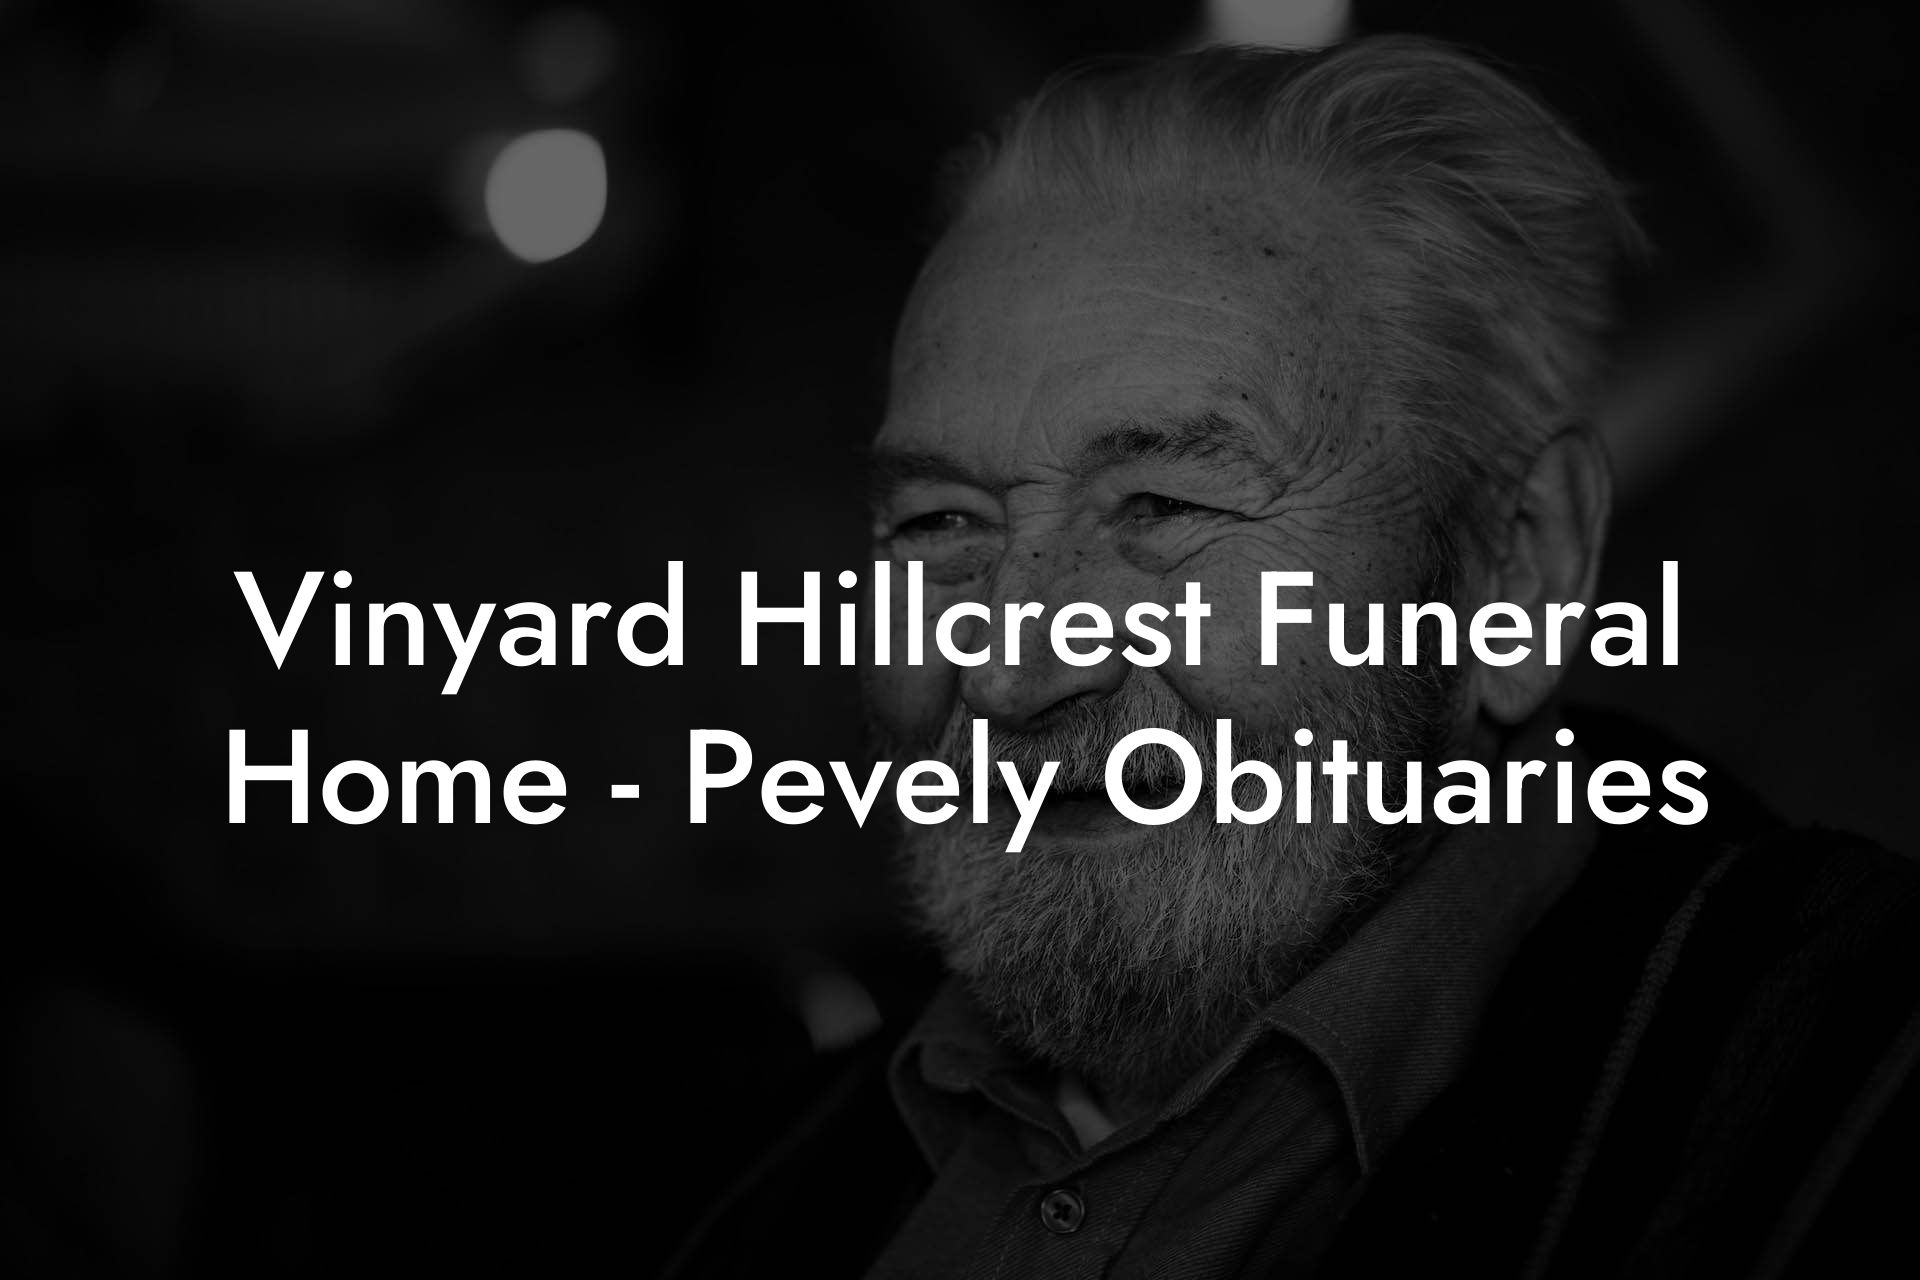 Vinyard Hillcrest Funeral Home - Pevely Obituaries